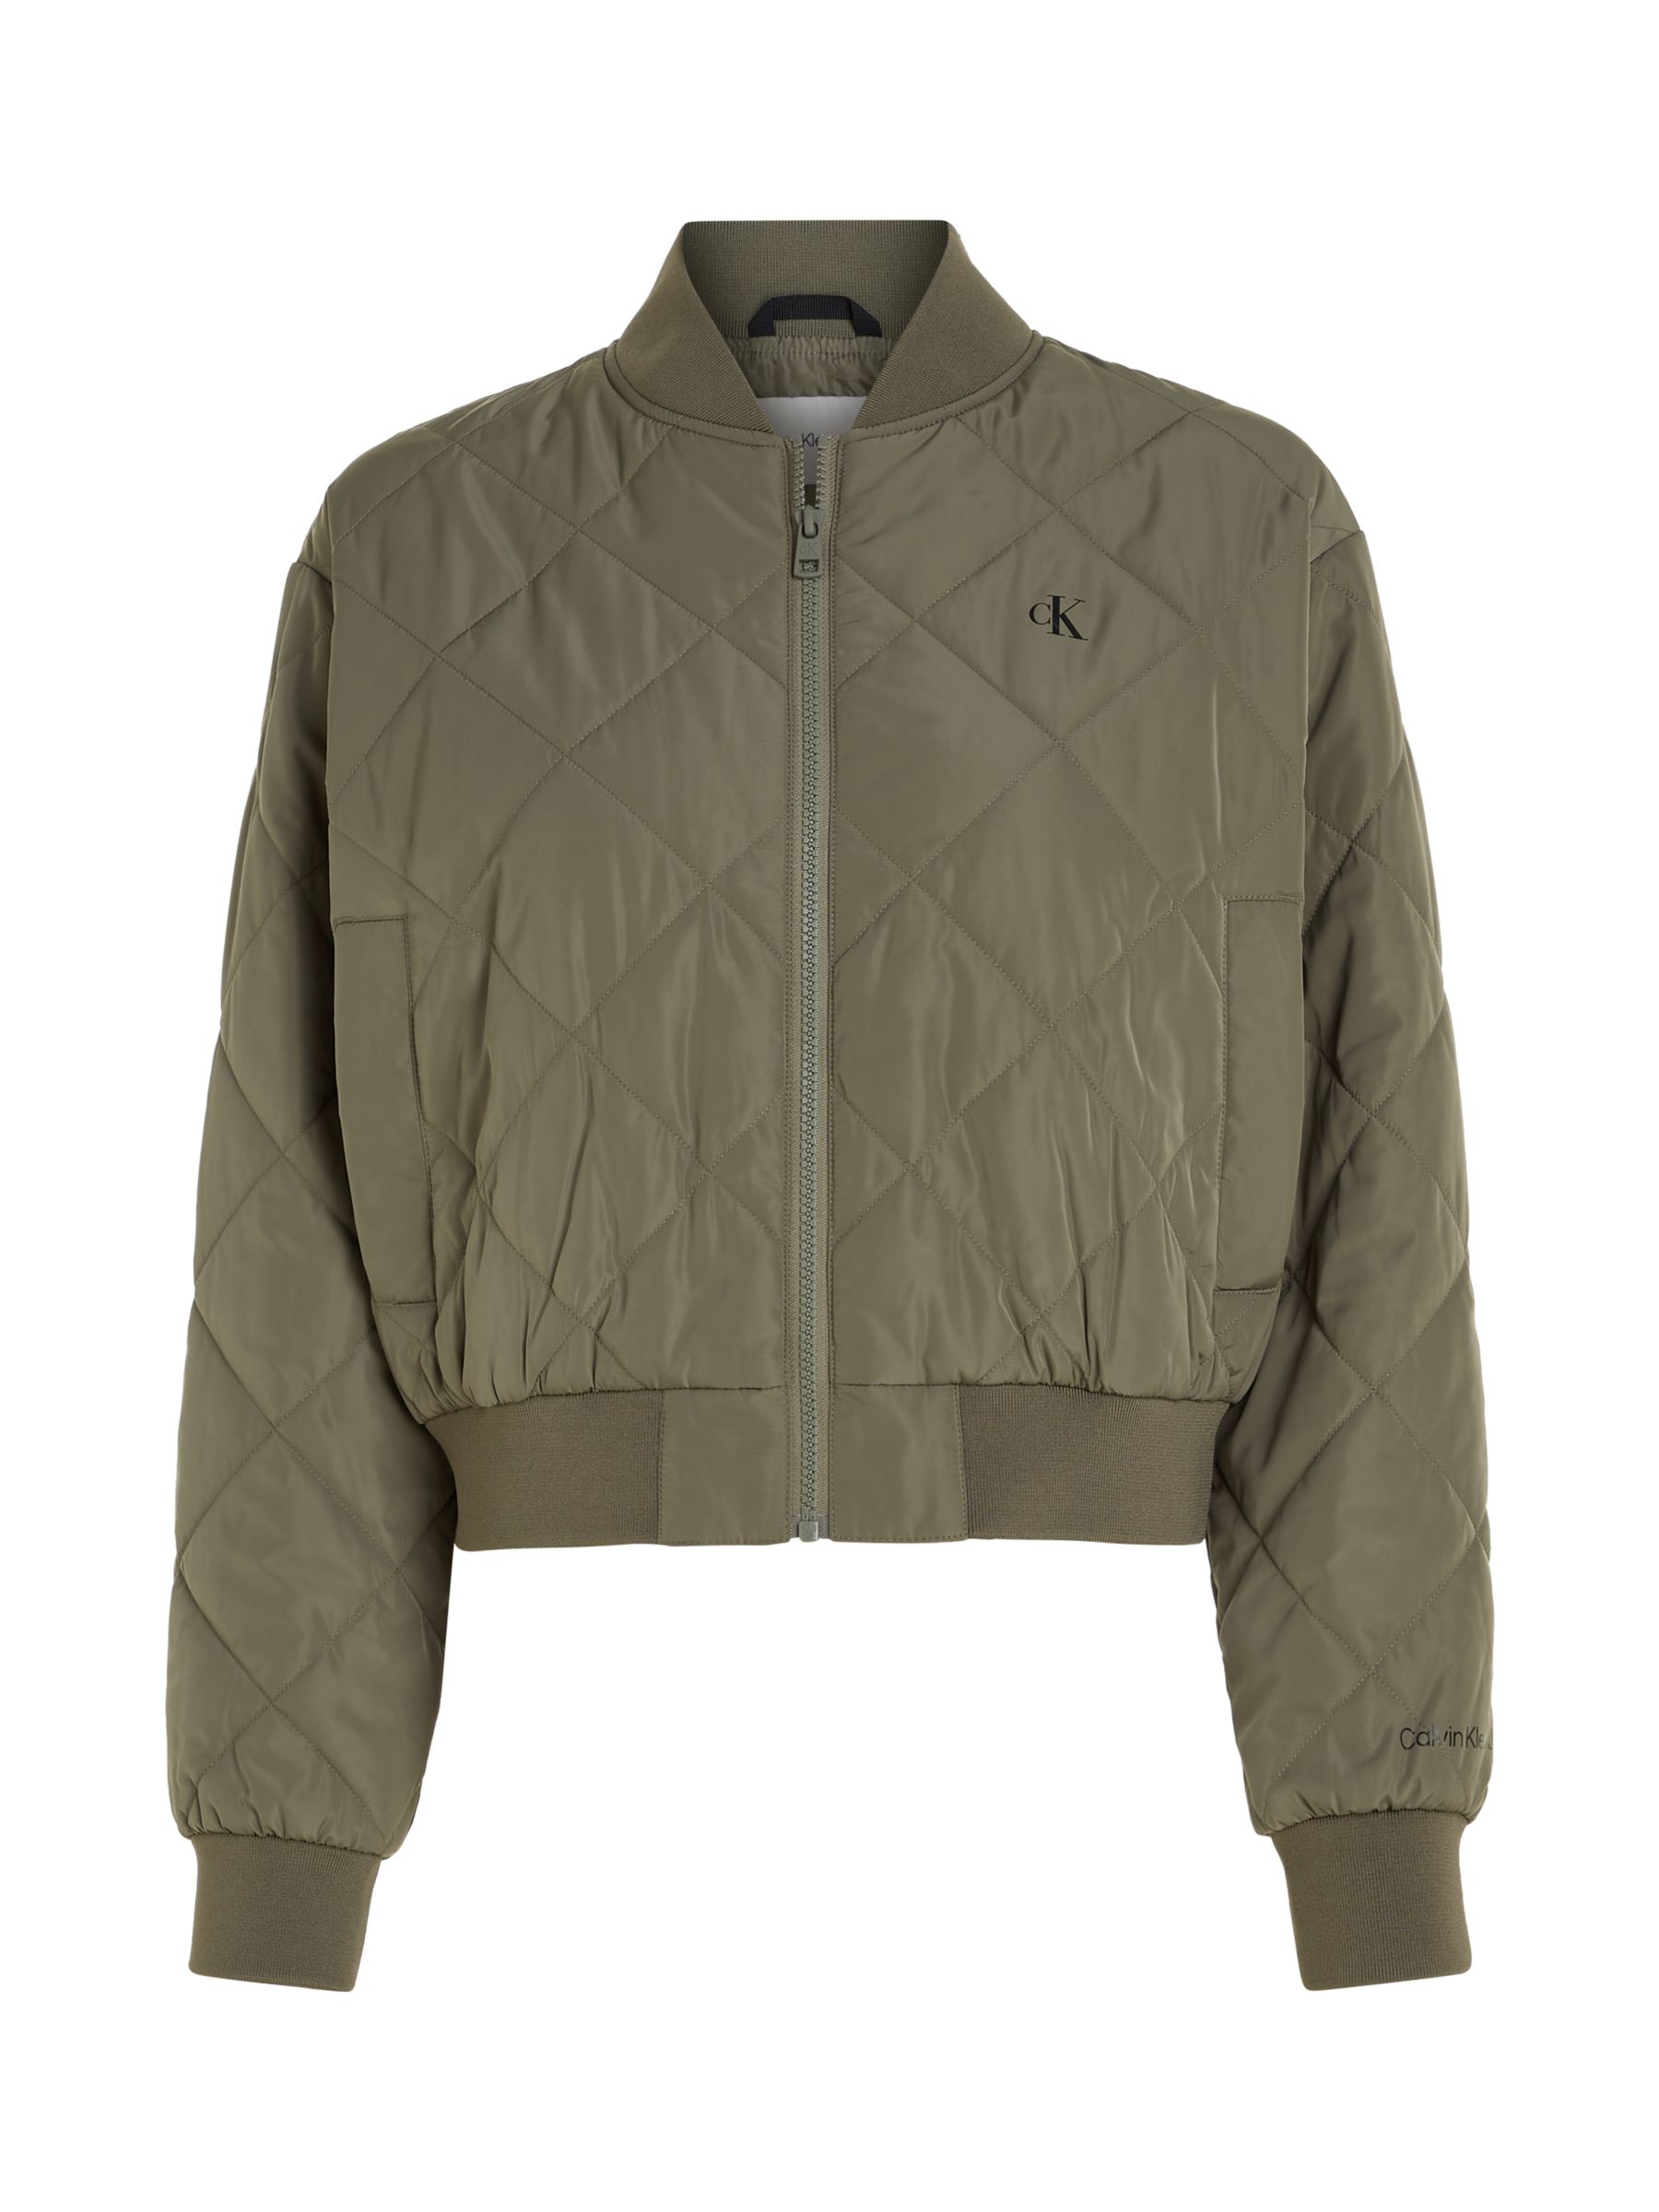 Calvin Klein Quilted Bomber Jacket, Dusty Olive at John Lewis & Partners